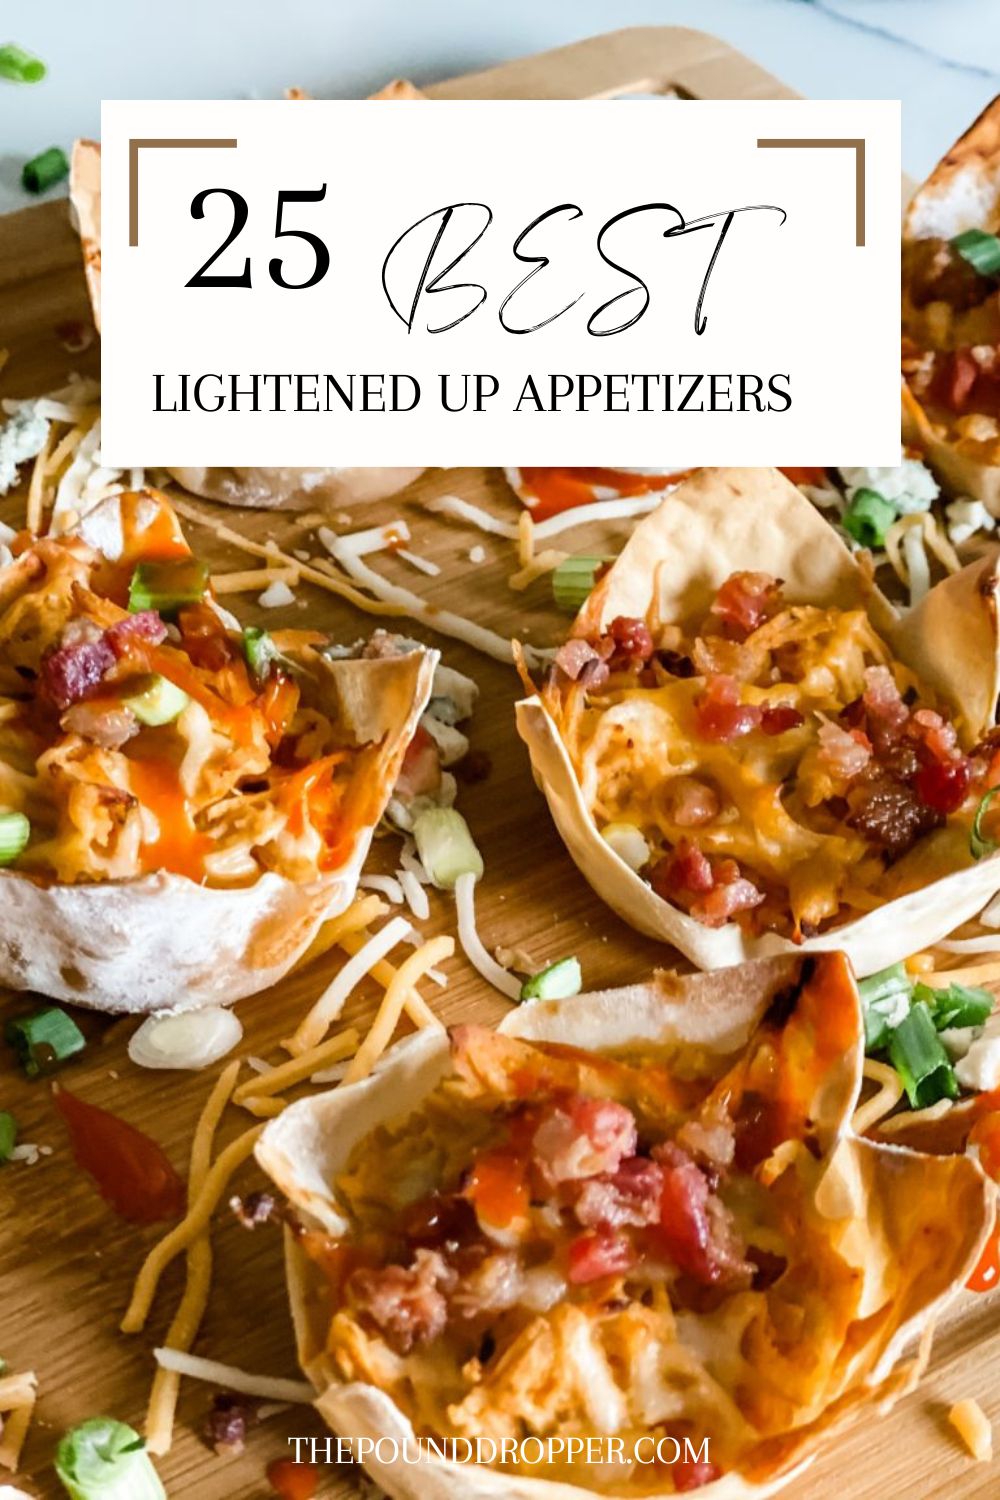 25 Best New Year’s Lightened Up Appetizers via @pounddropper